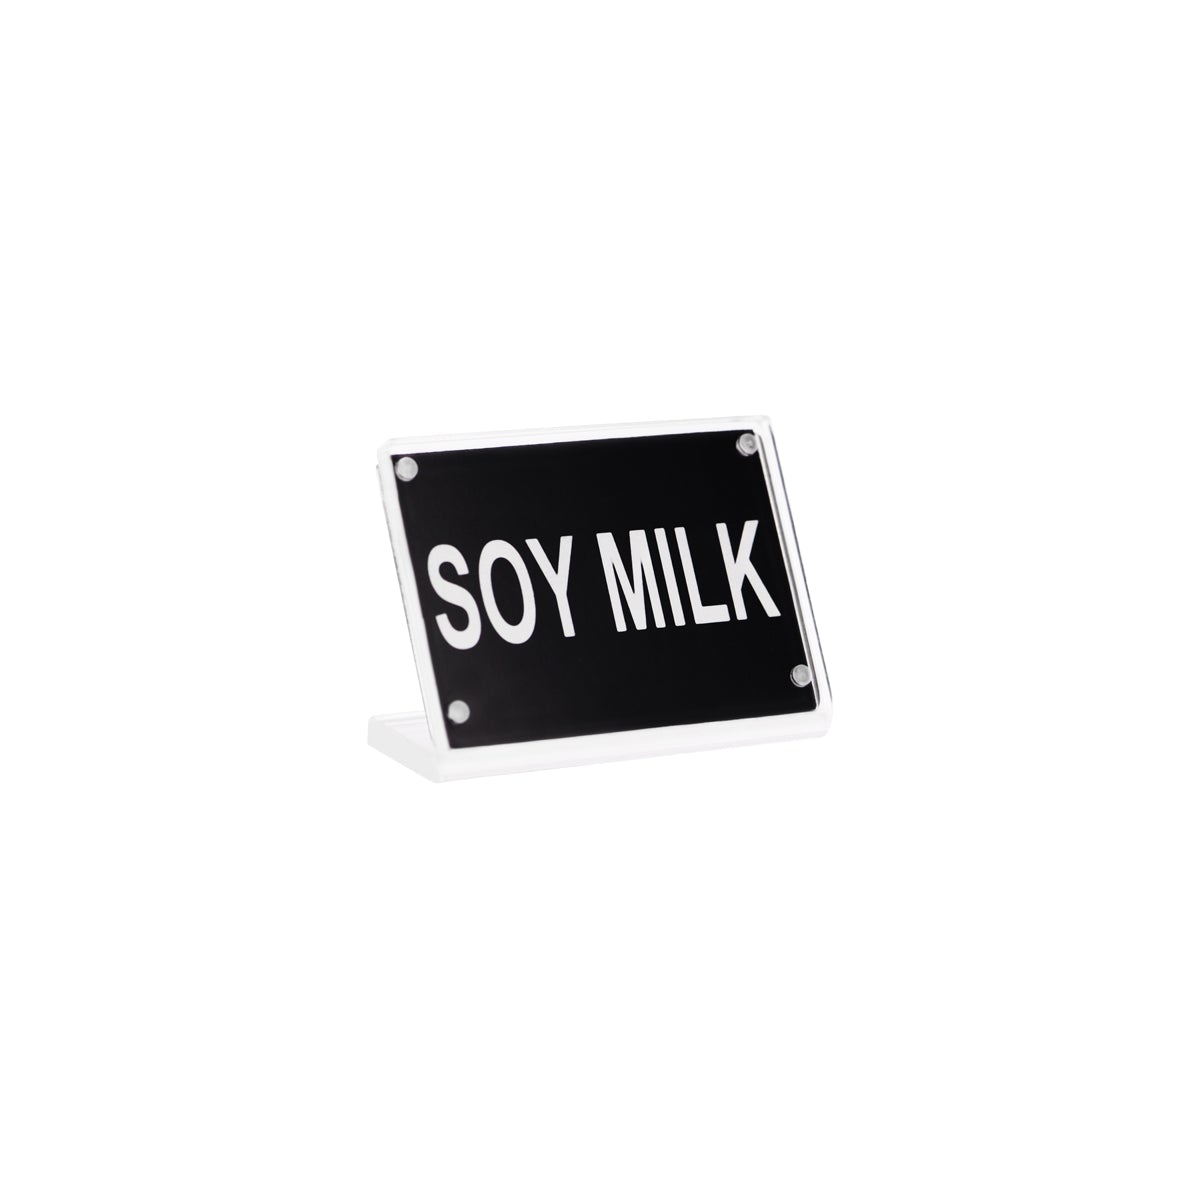 81309 Chef Inox Buffet Sign Acrylic with Magnet Plate - Soy Milk Tomkin Australia Hospitality Supplies